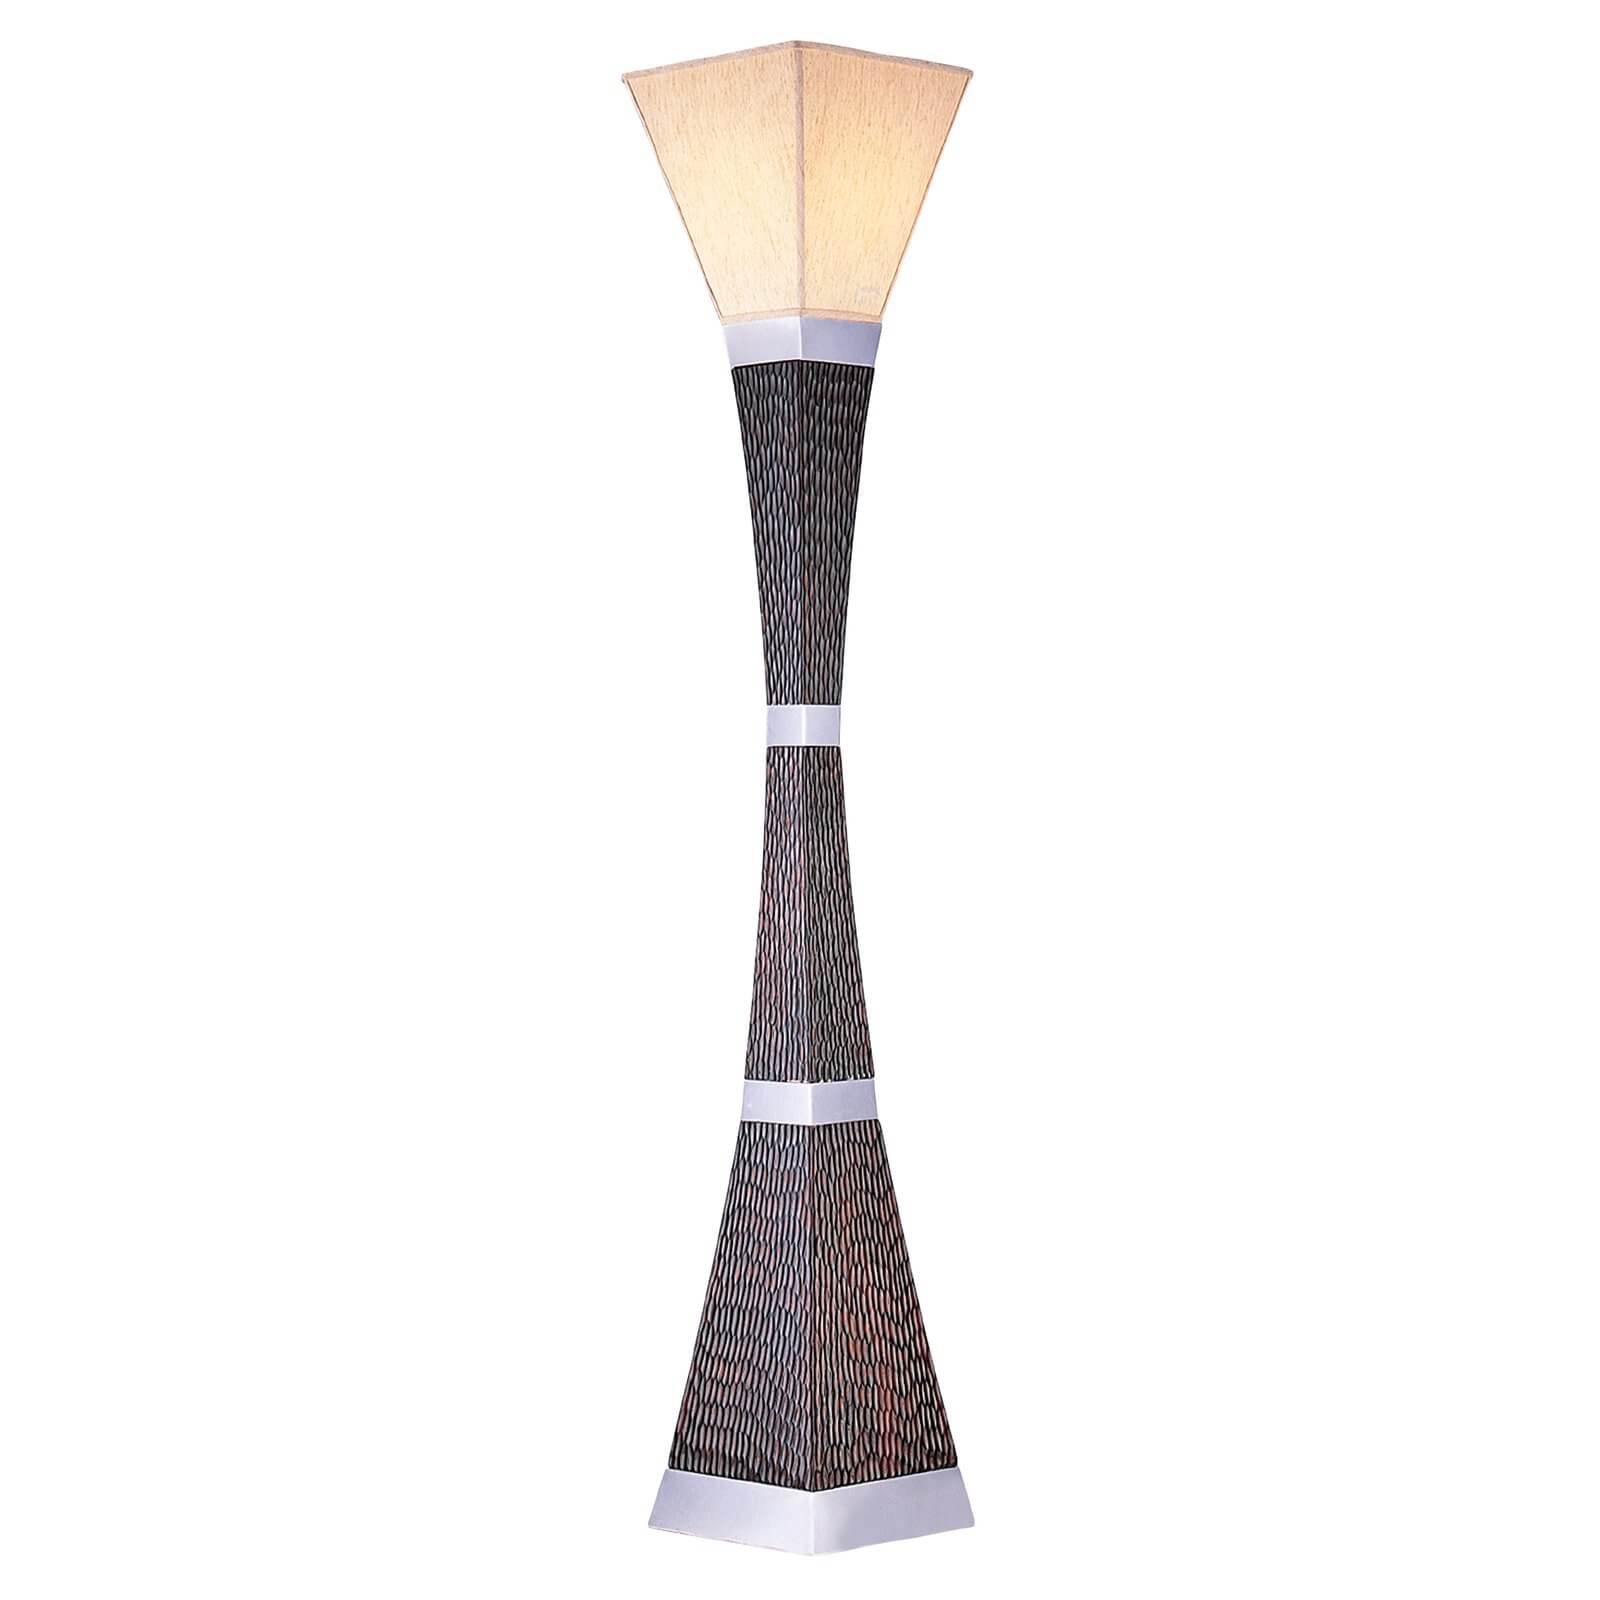 Our second torchiere lamp conveys a boldly contemporary style, with an hourglass shape crafted in textured wood and metal.